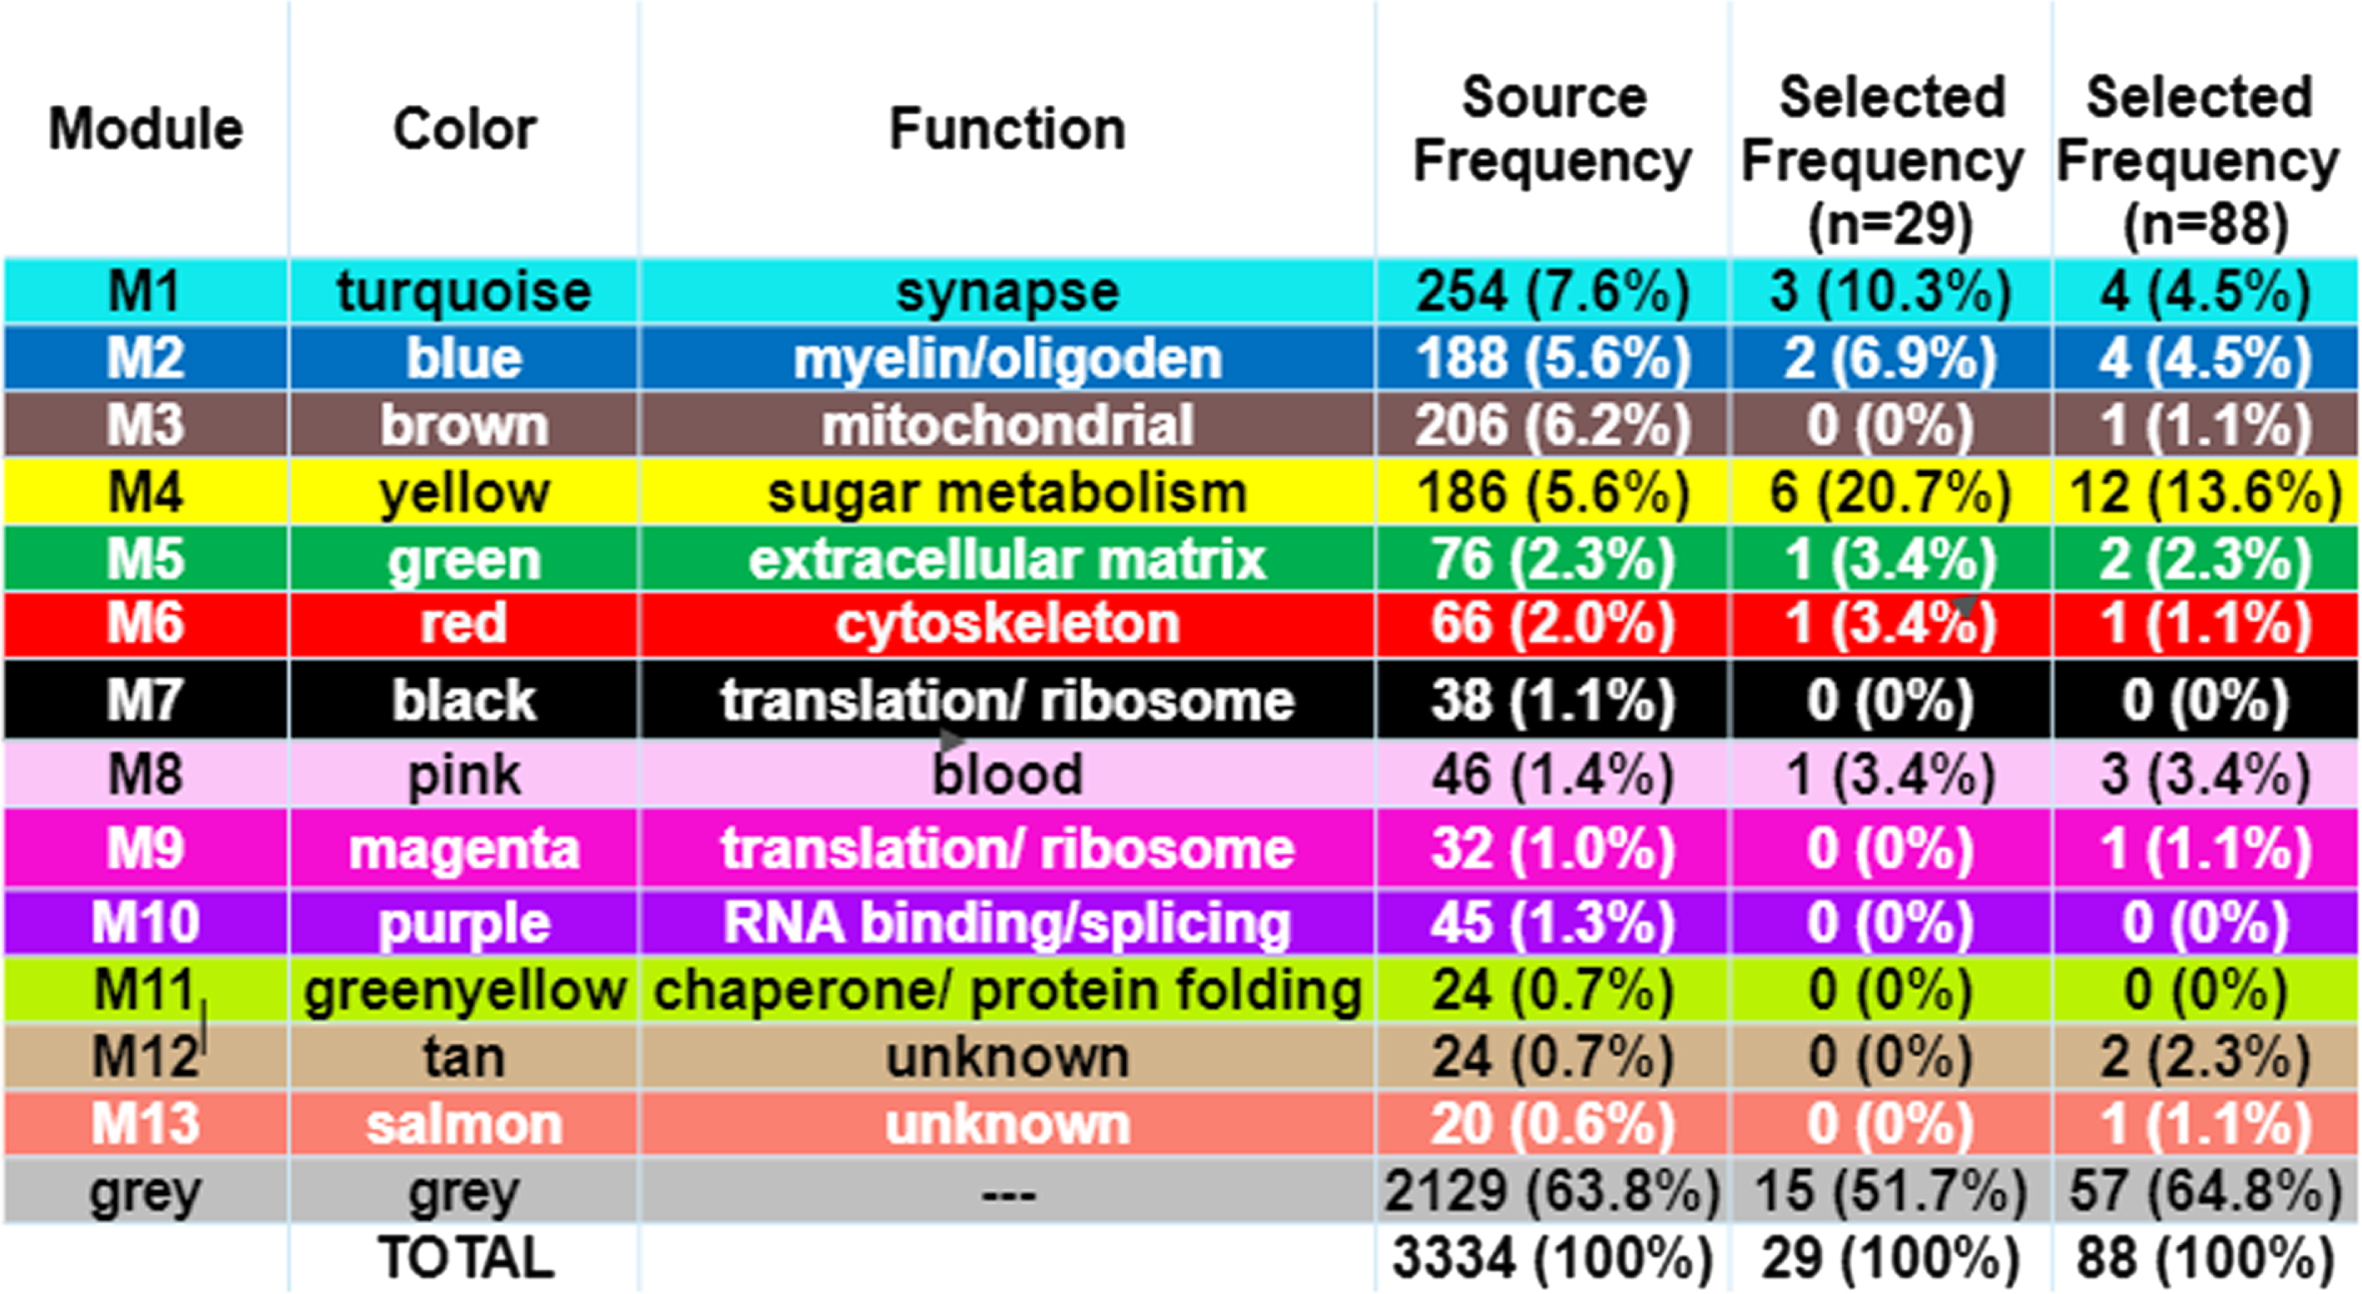 Functional Protein Module of Selected “Best” Predictive Proteins. The functional protein modules are as defined by Johnson et al. [3]. Source frequency is the frequency of the module in the source protein set (n = 3334 unique proteins). The selected frequency is for selected best proteins, n = 29 or n = 88. The M4 yellow module for sugar metabolism is significantly enriched (p < 0.05) in selected proteins compared to their frequency in source. Enrichment of sugar metabolism in the selected predictive proteins signifies their importance to diagnostic classification.